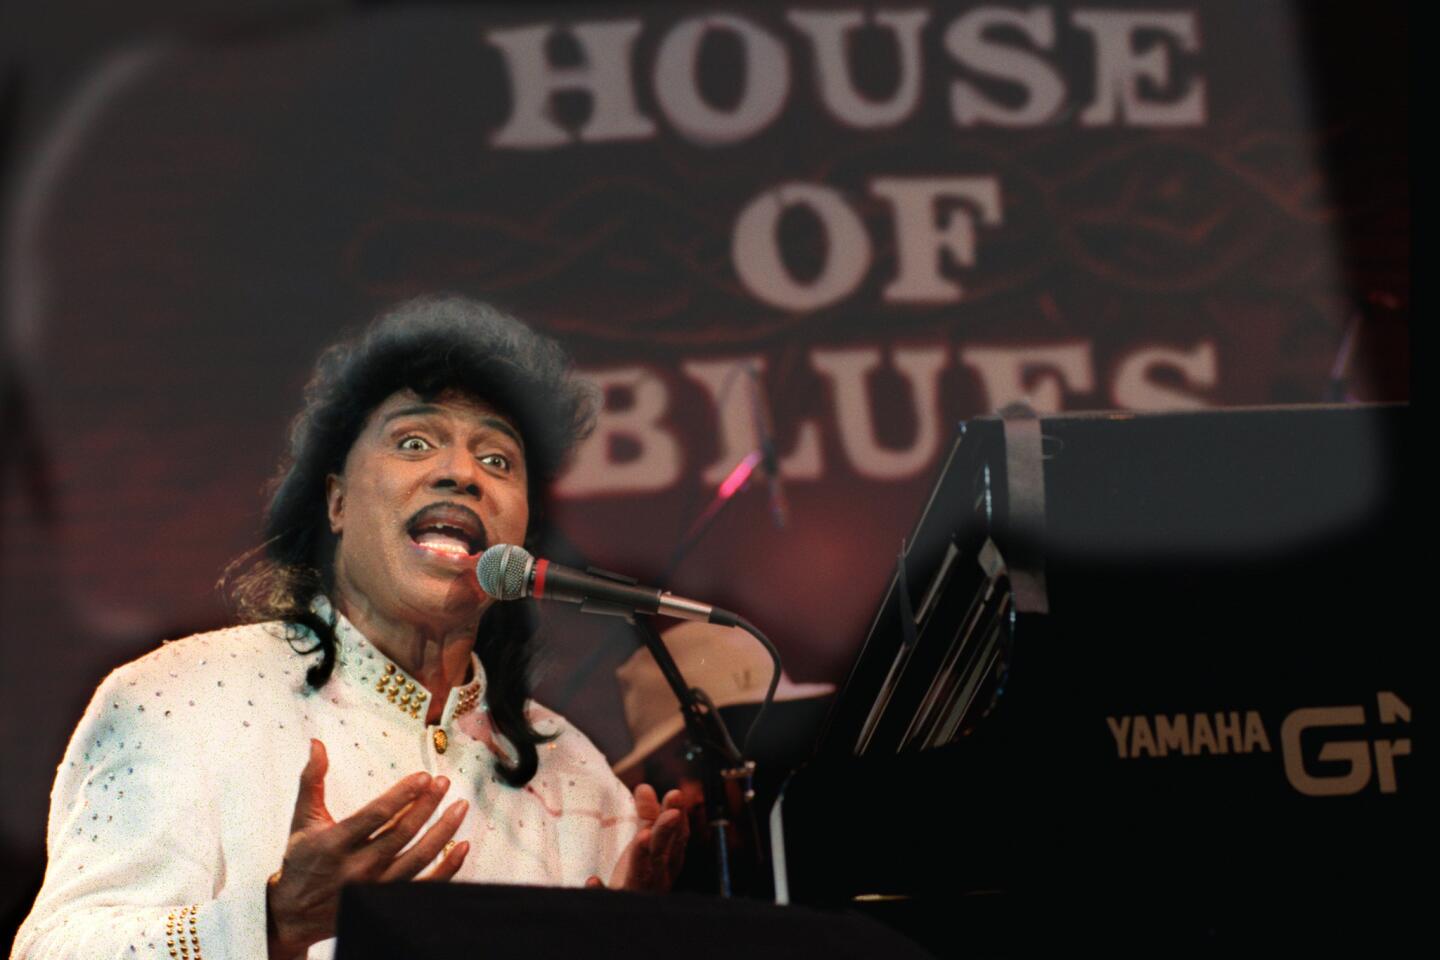 The flamboyant, piano-pounding Little Richard roared into the rock 'n' roll spotlight in the 1950s with hits such as “Tutti-Frutti,” “Long Tall Sally” and “Good Golly, Miss Molly.” The Georgia native’s raucous sound fused gospel fervor and R&B sexuality, profoundly influencing the Beatles, James Brown (who succeeded him in one of his early bands), Jimi Hendrix (one of his backup musicians in the mid-'60s) and Bruce Springsteen. He was 87.